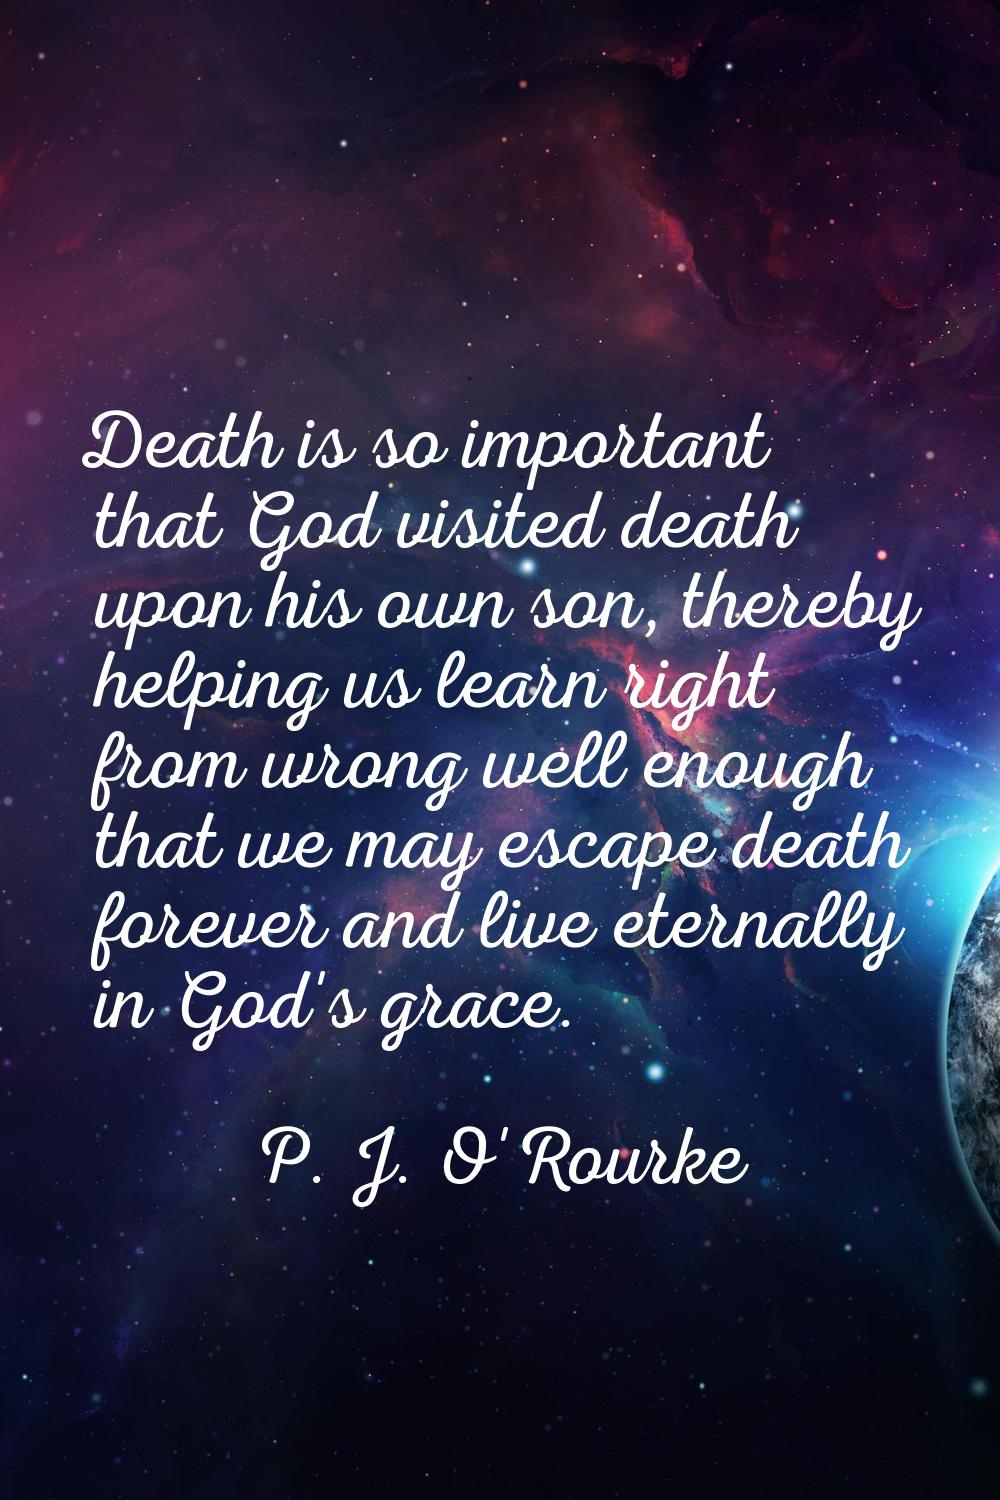 Death is so important that God visited death upon his own son, thereby helping us learn right from 